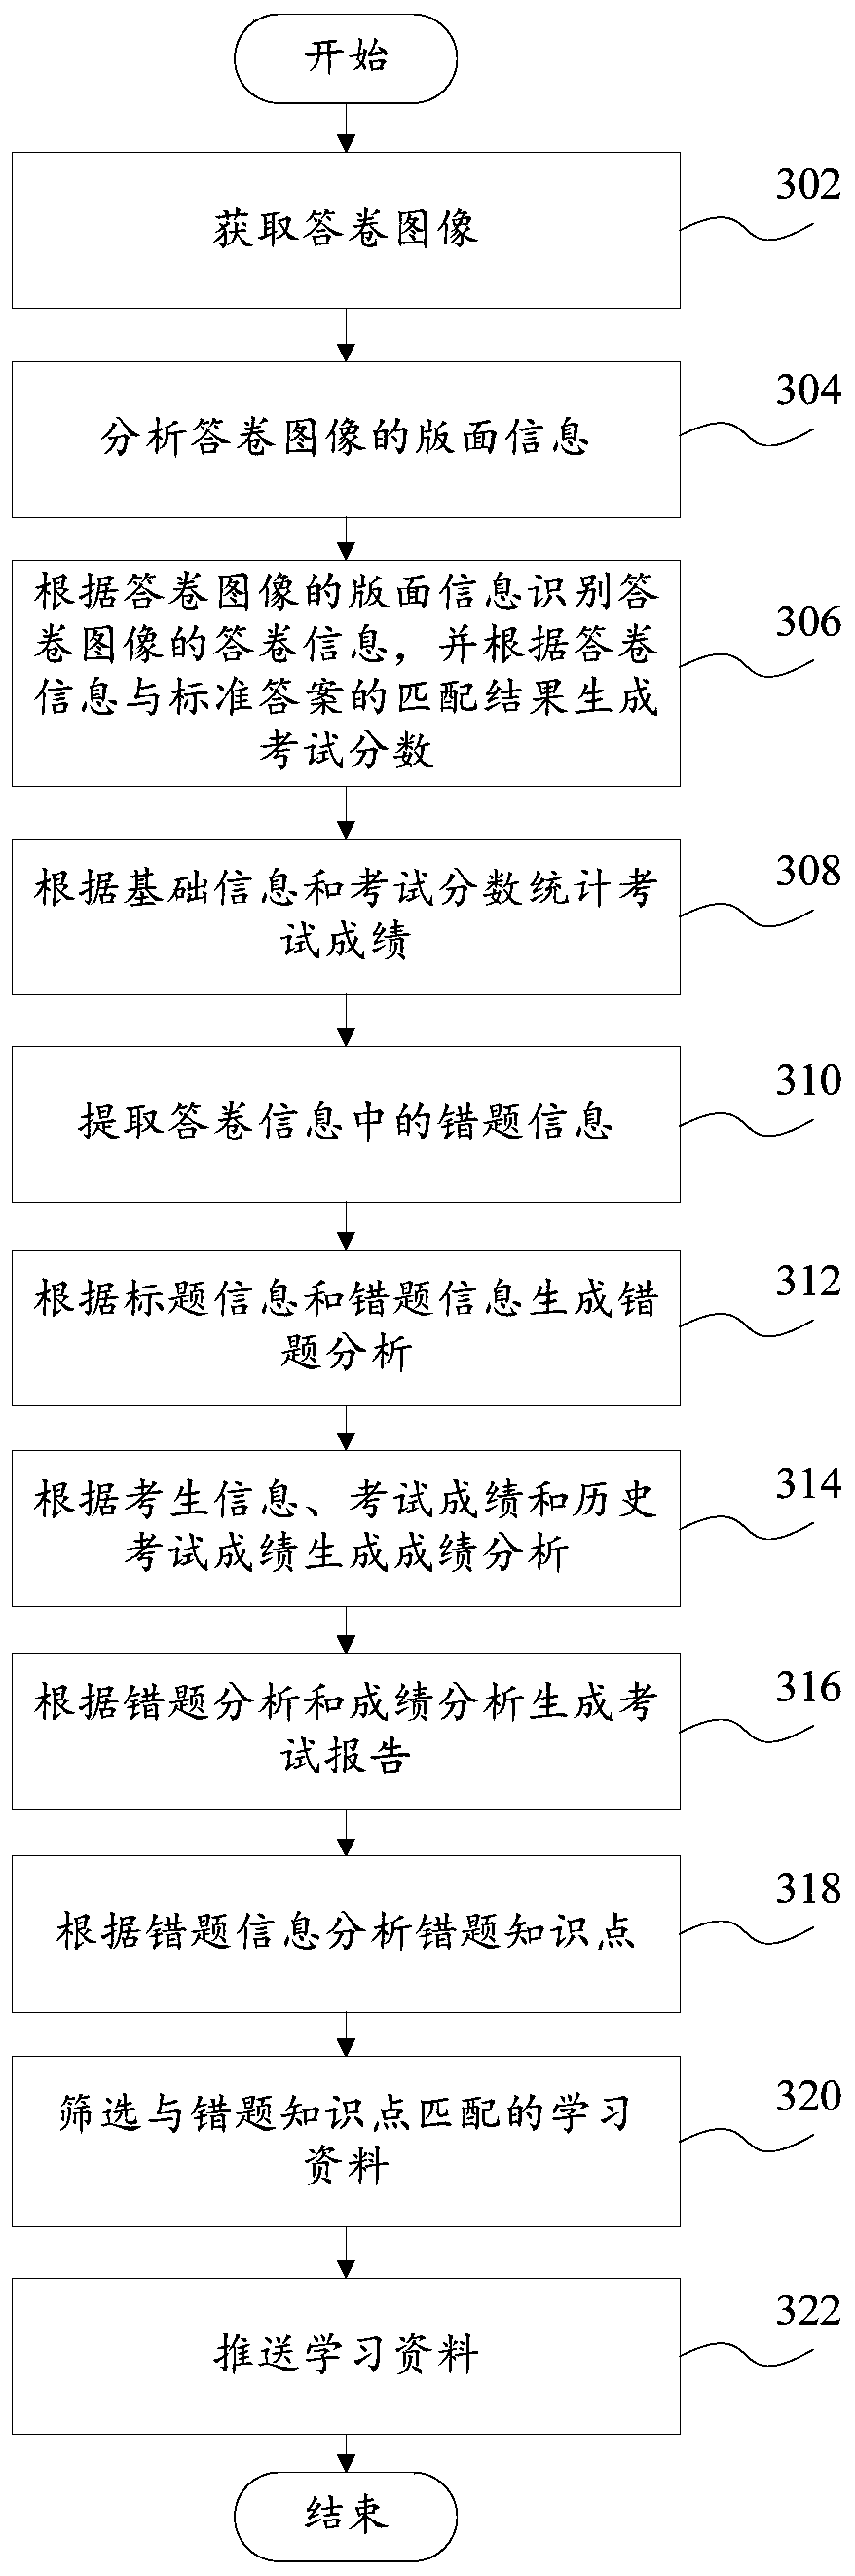 Test paper processing method and system